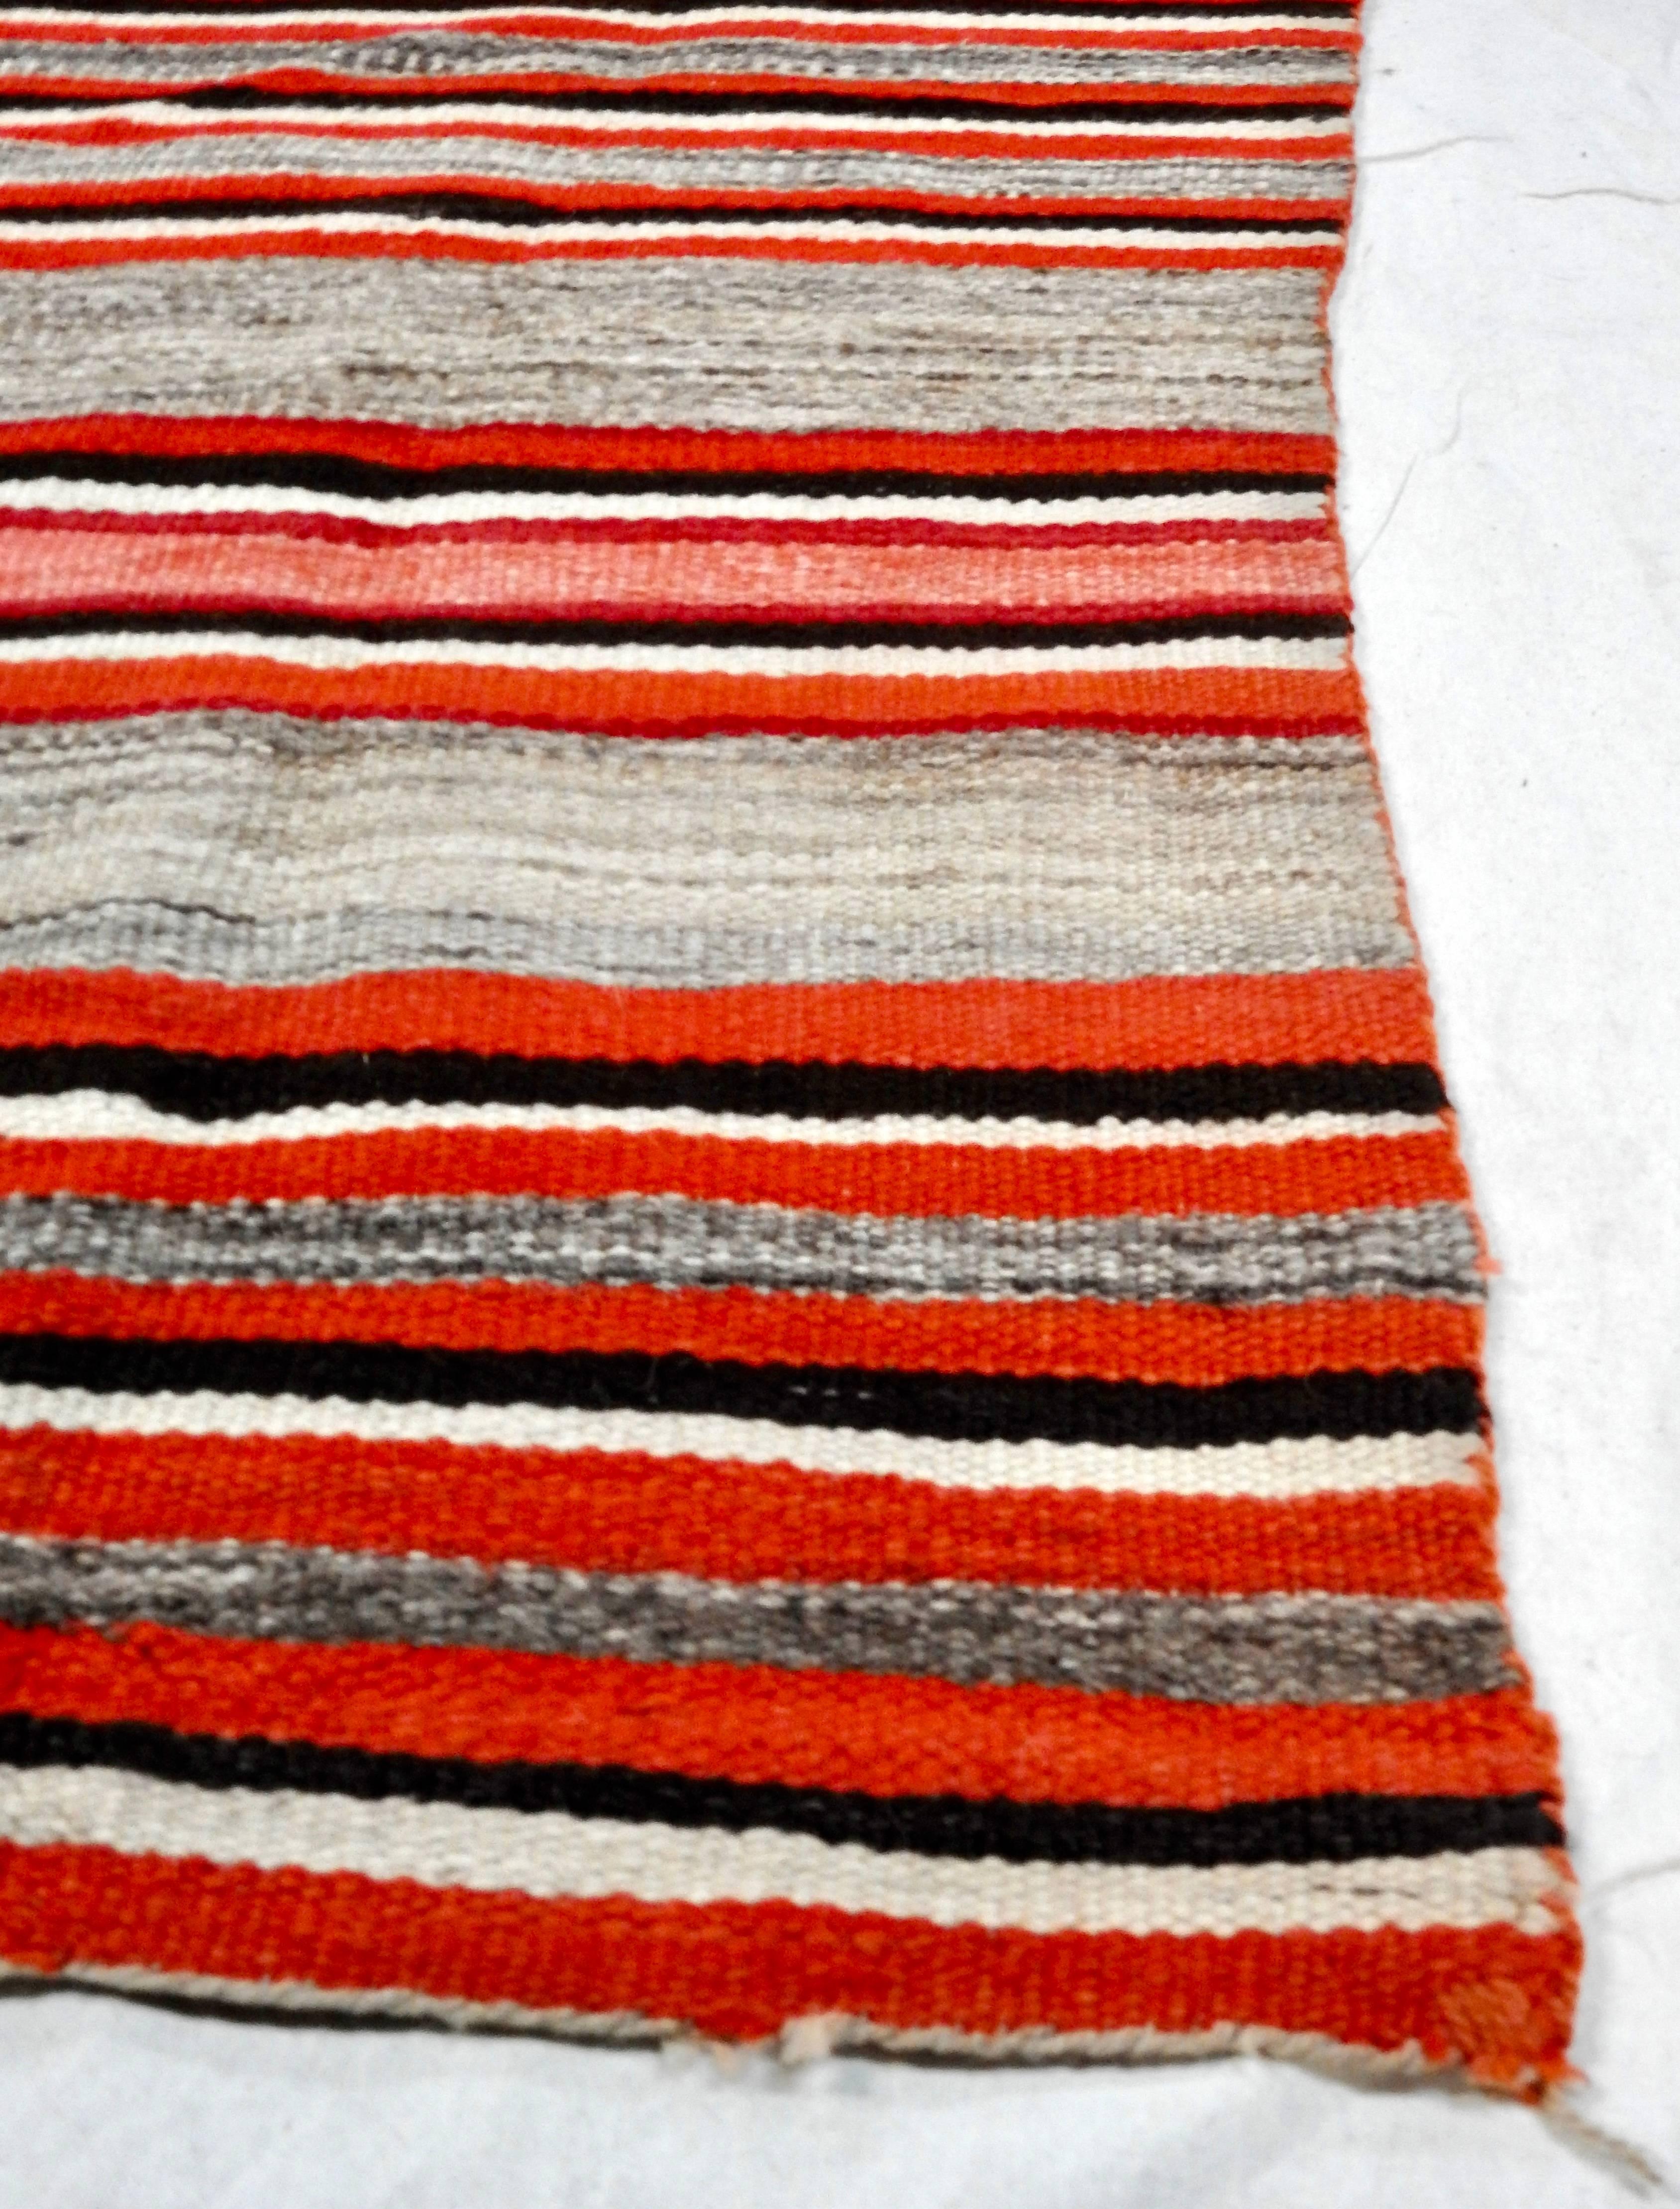 Featured is an antique, circa 1890s handwoven Navajo transitional wool rug. The rug features bold stripes of various widths, in a palette of red-orange, cream, tan and black, with tan and brown twisted stitches to the edges, and short twisted